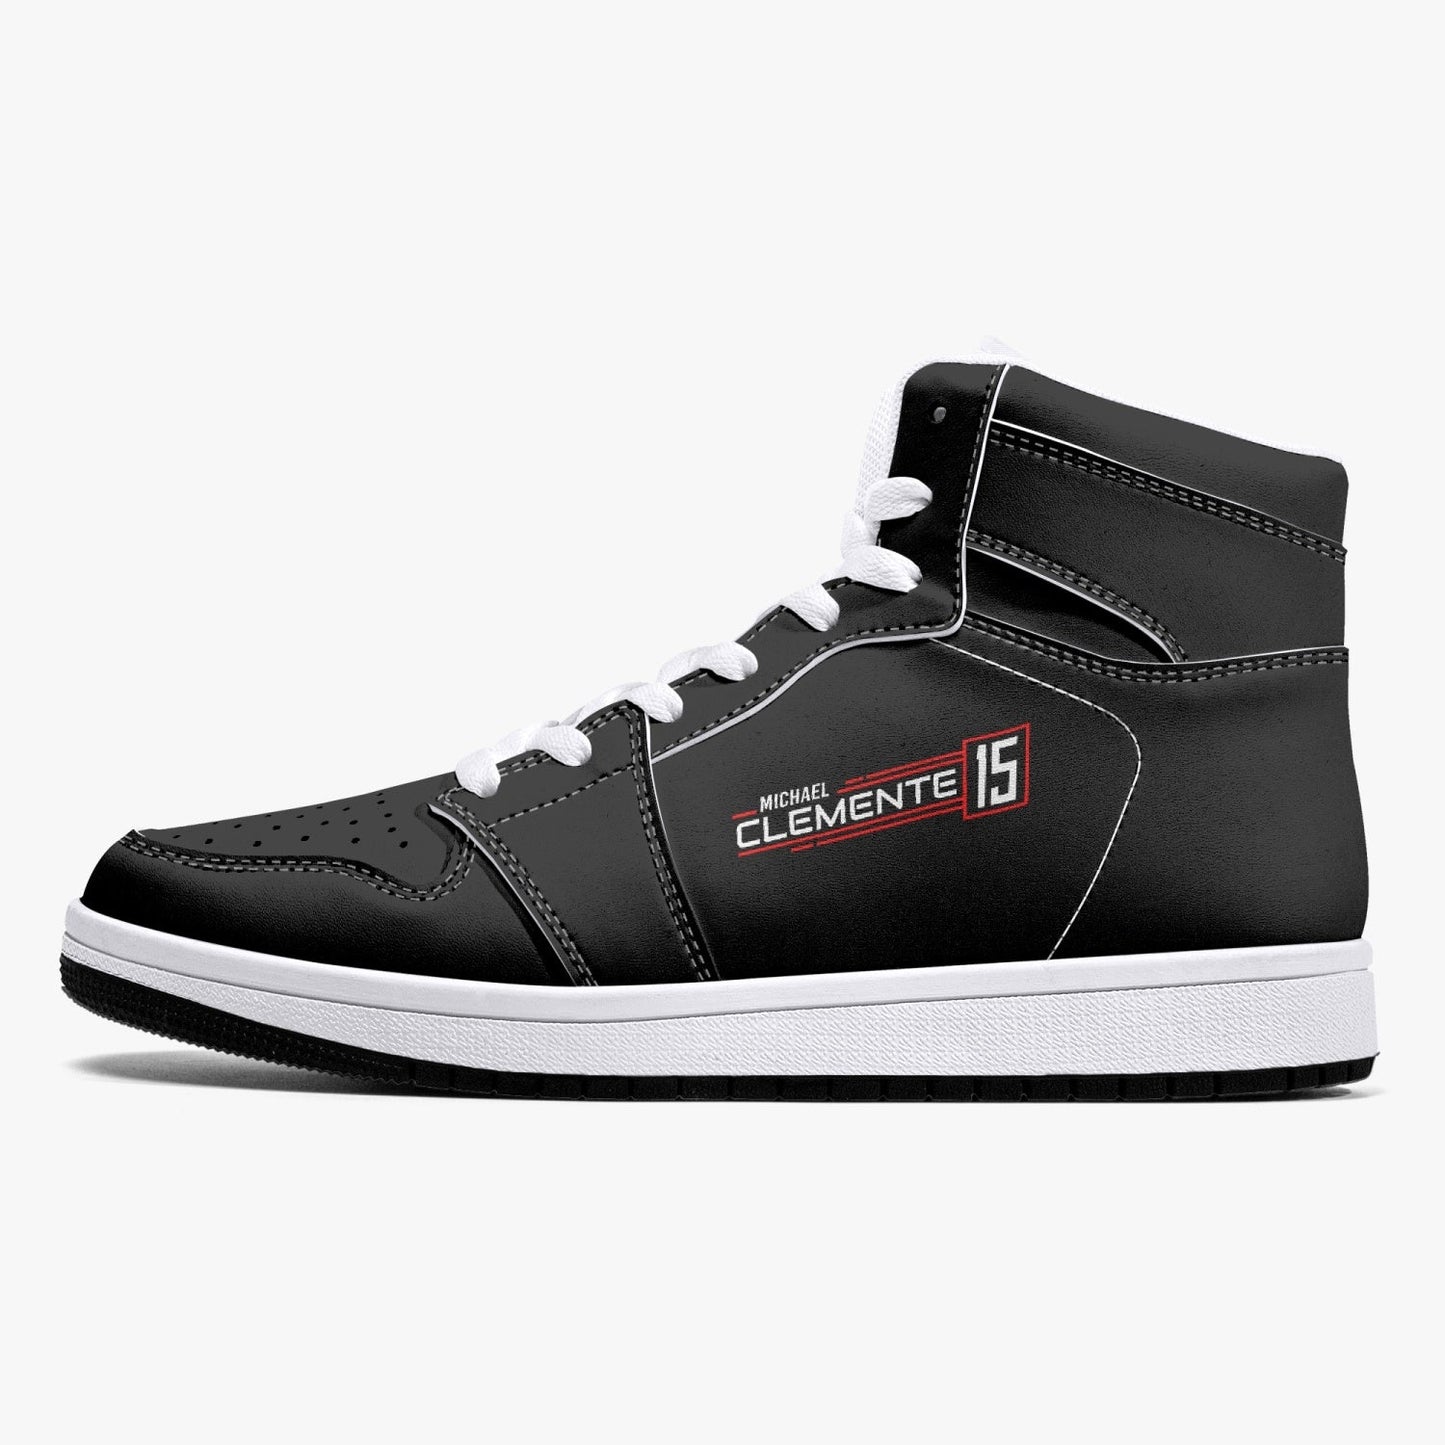 MICHAEL CLEMENTE 15 Ultimate High-Top Leather Sneakers - carbon white